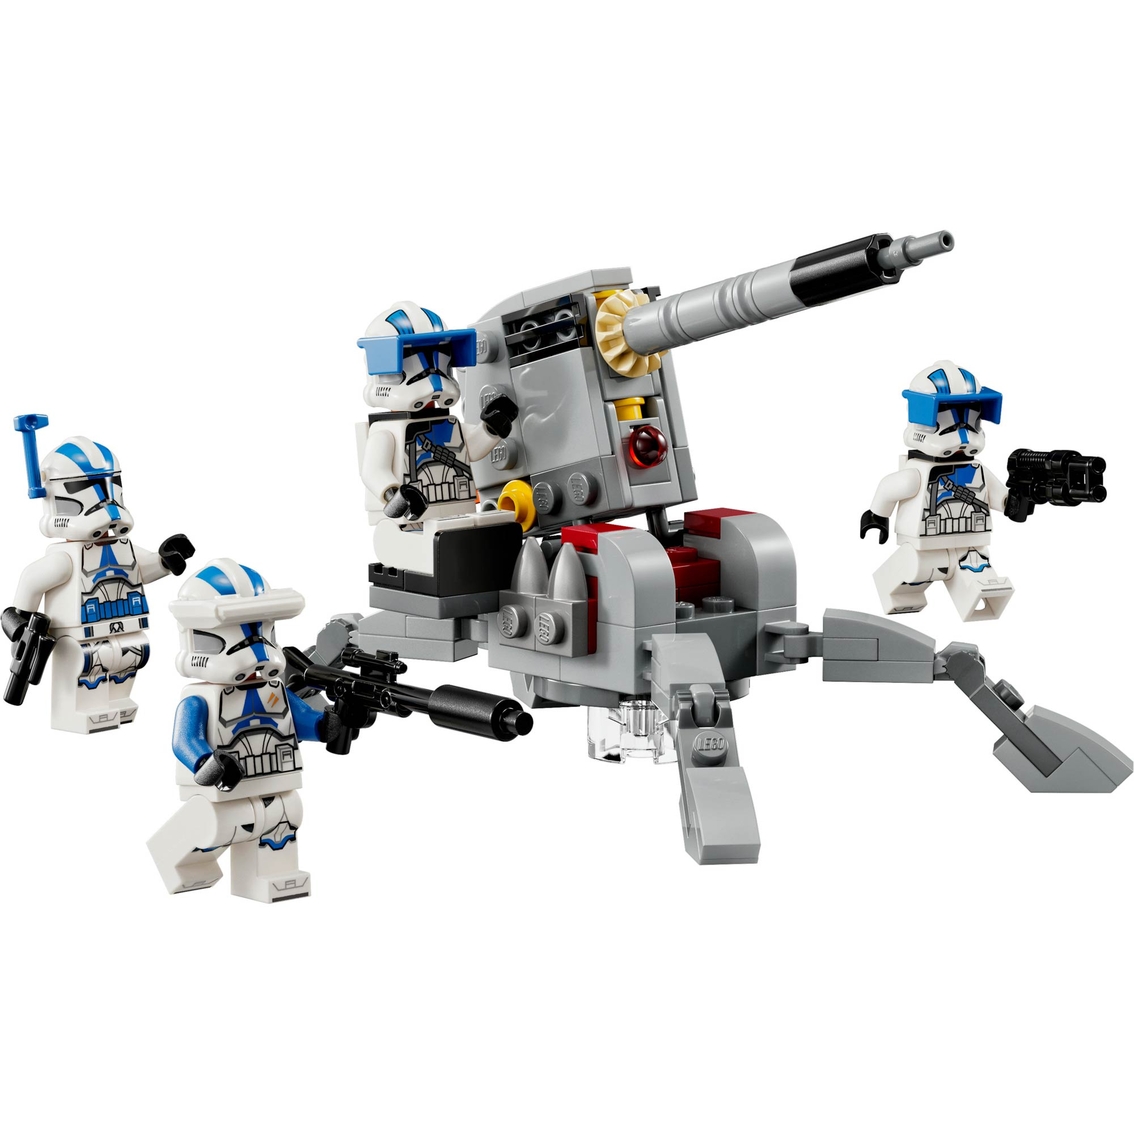 Lego Star Wars 501st Clone Troopers Battle Pack 75345 - Image 2 of 2